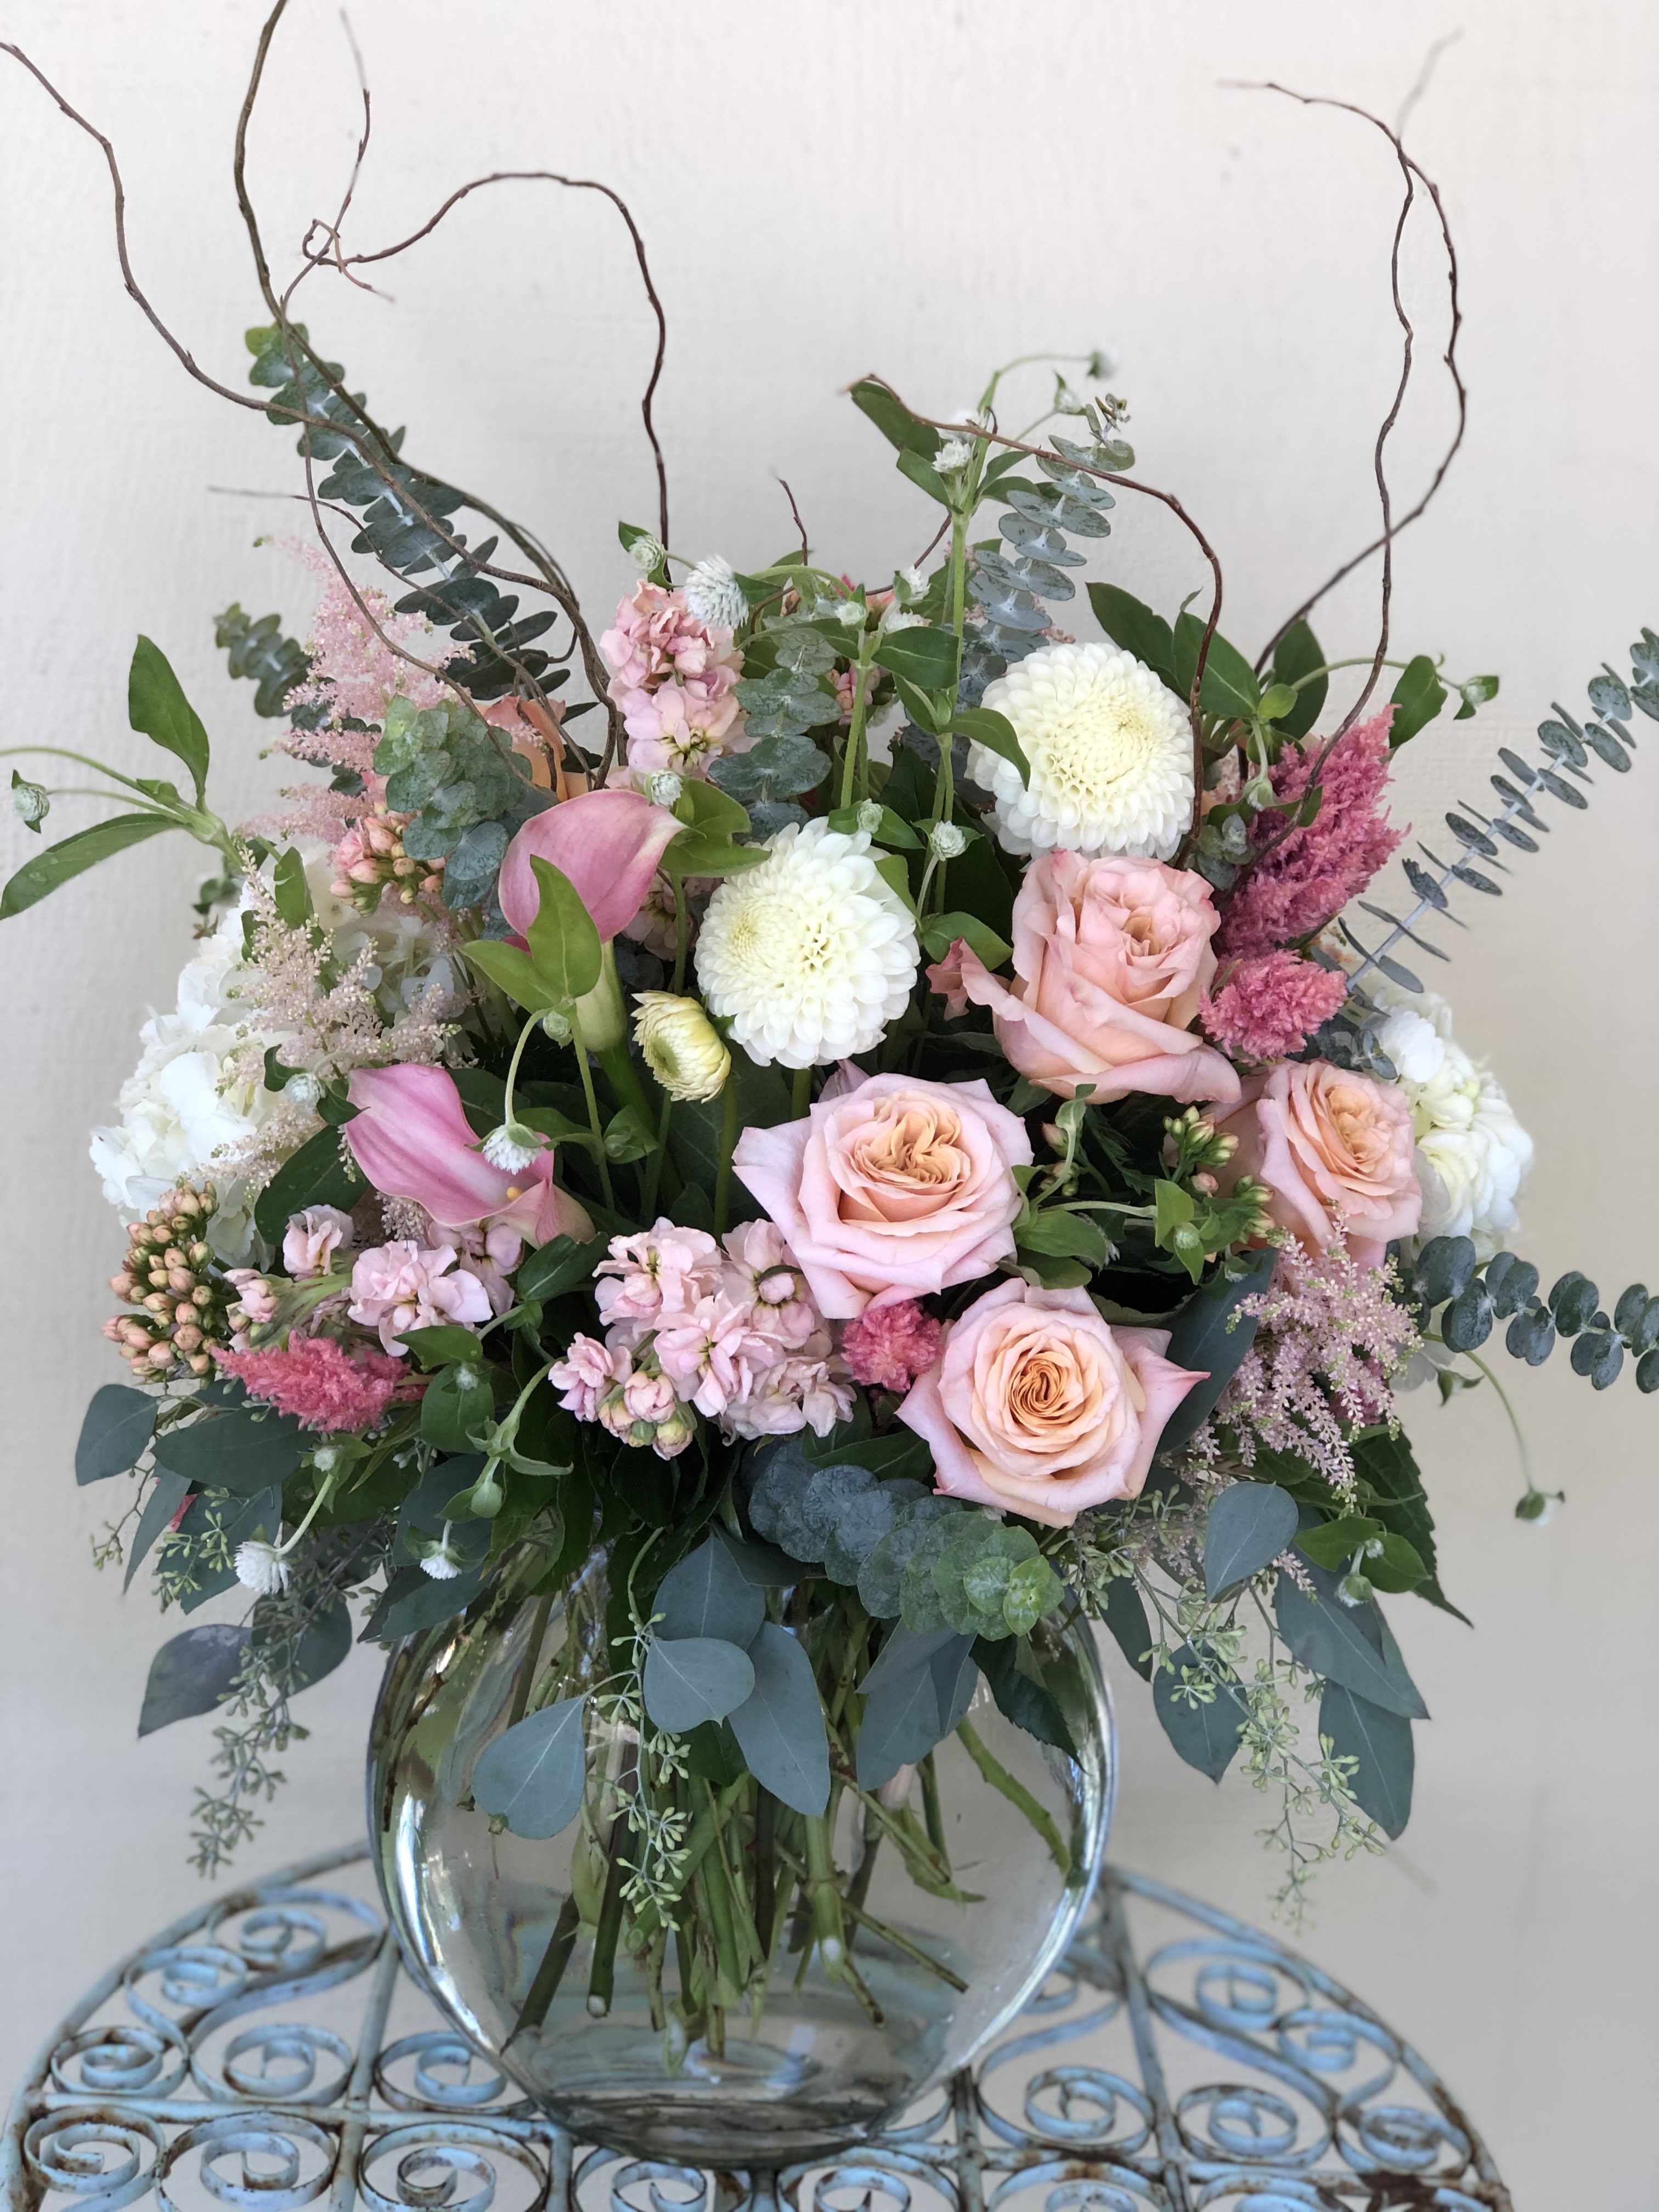 Envy - A beautiful combination of Roses, Dahlia, Hydrangeas, Calla, Astilbe and other seasonal flowers &amp; greens in a tall glass vase. Floral Arrangement subject to change based on seasonal availability. Containers subject to change based on availability. However we will create something very similar to the photo. 